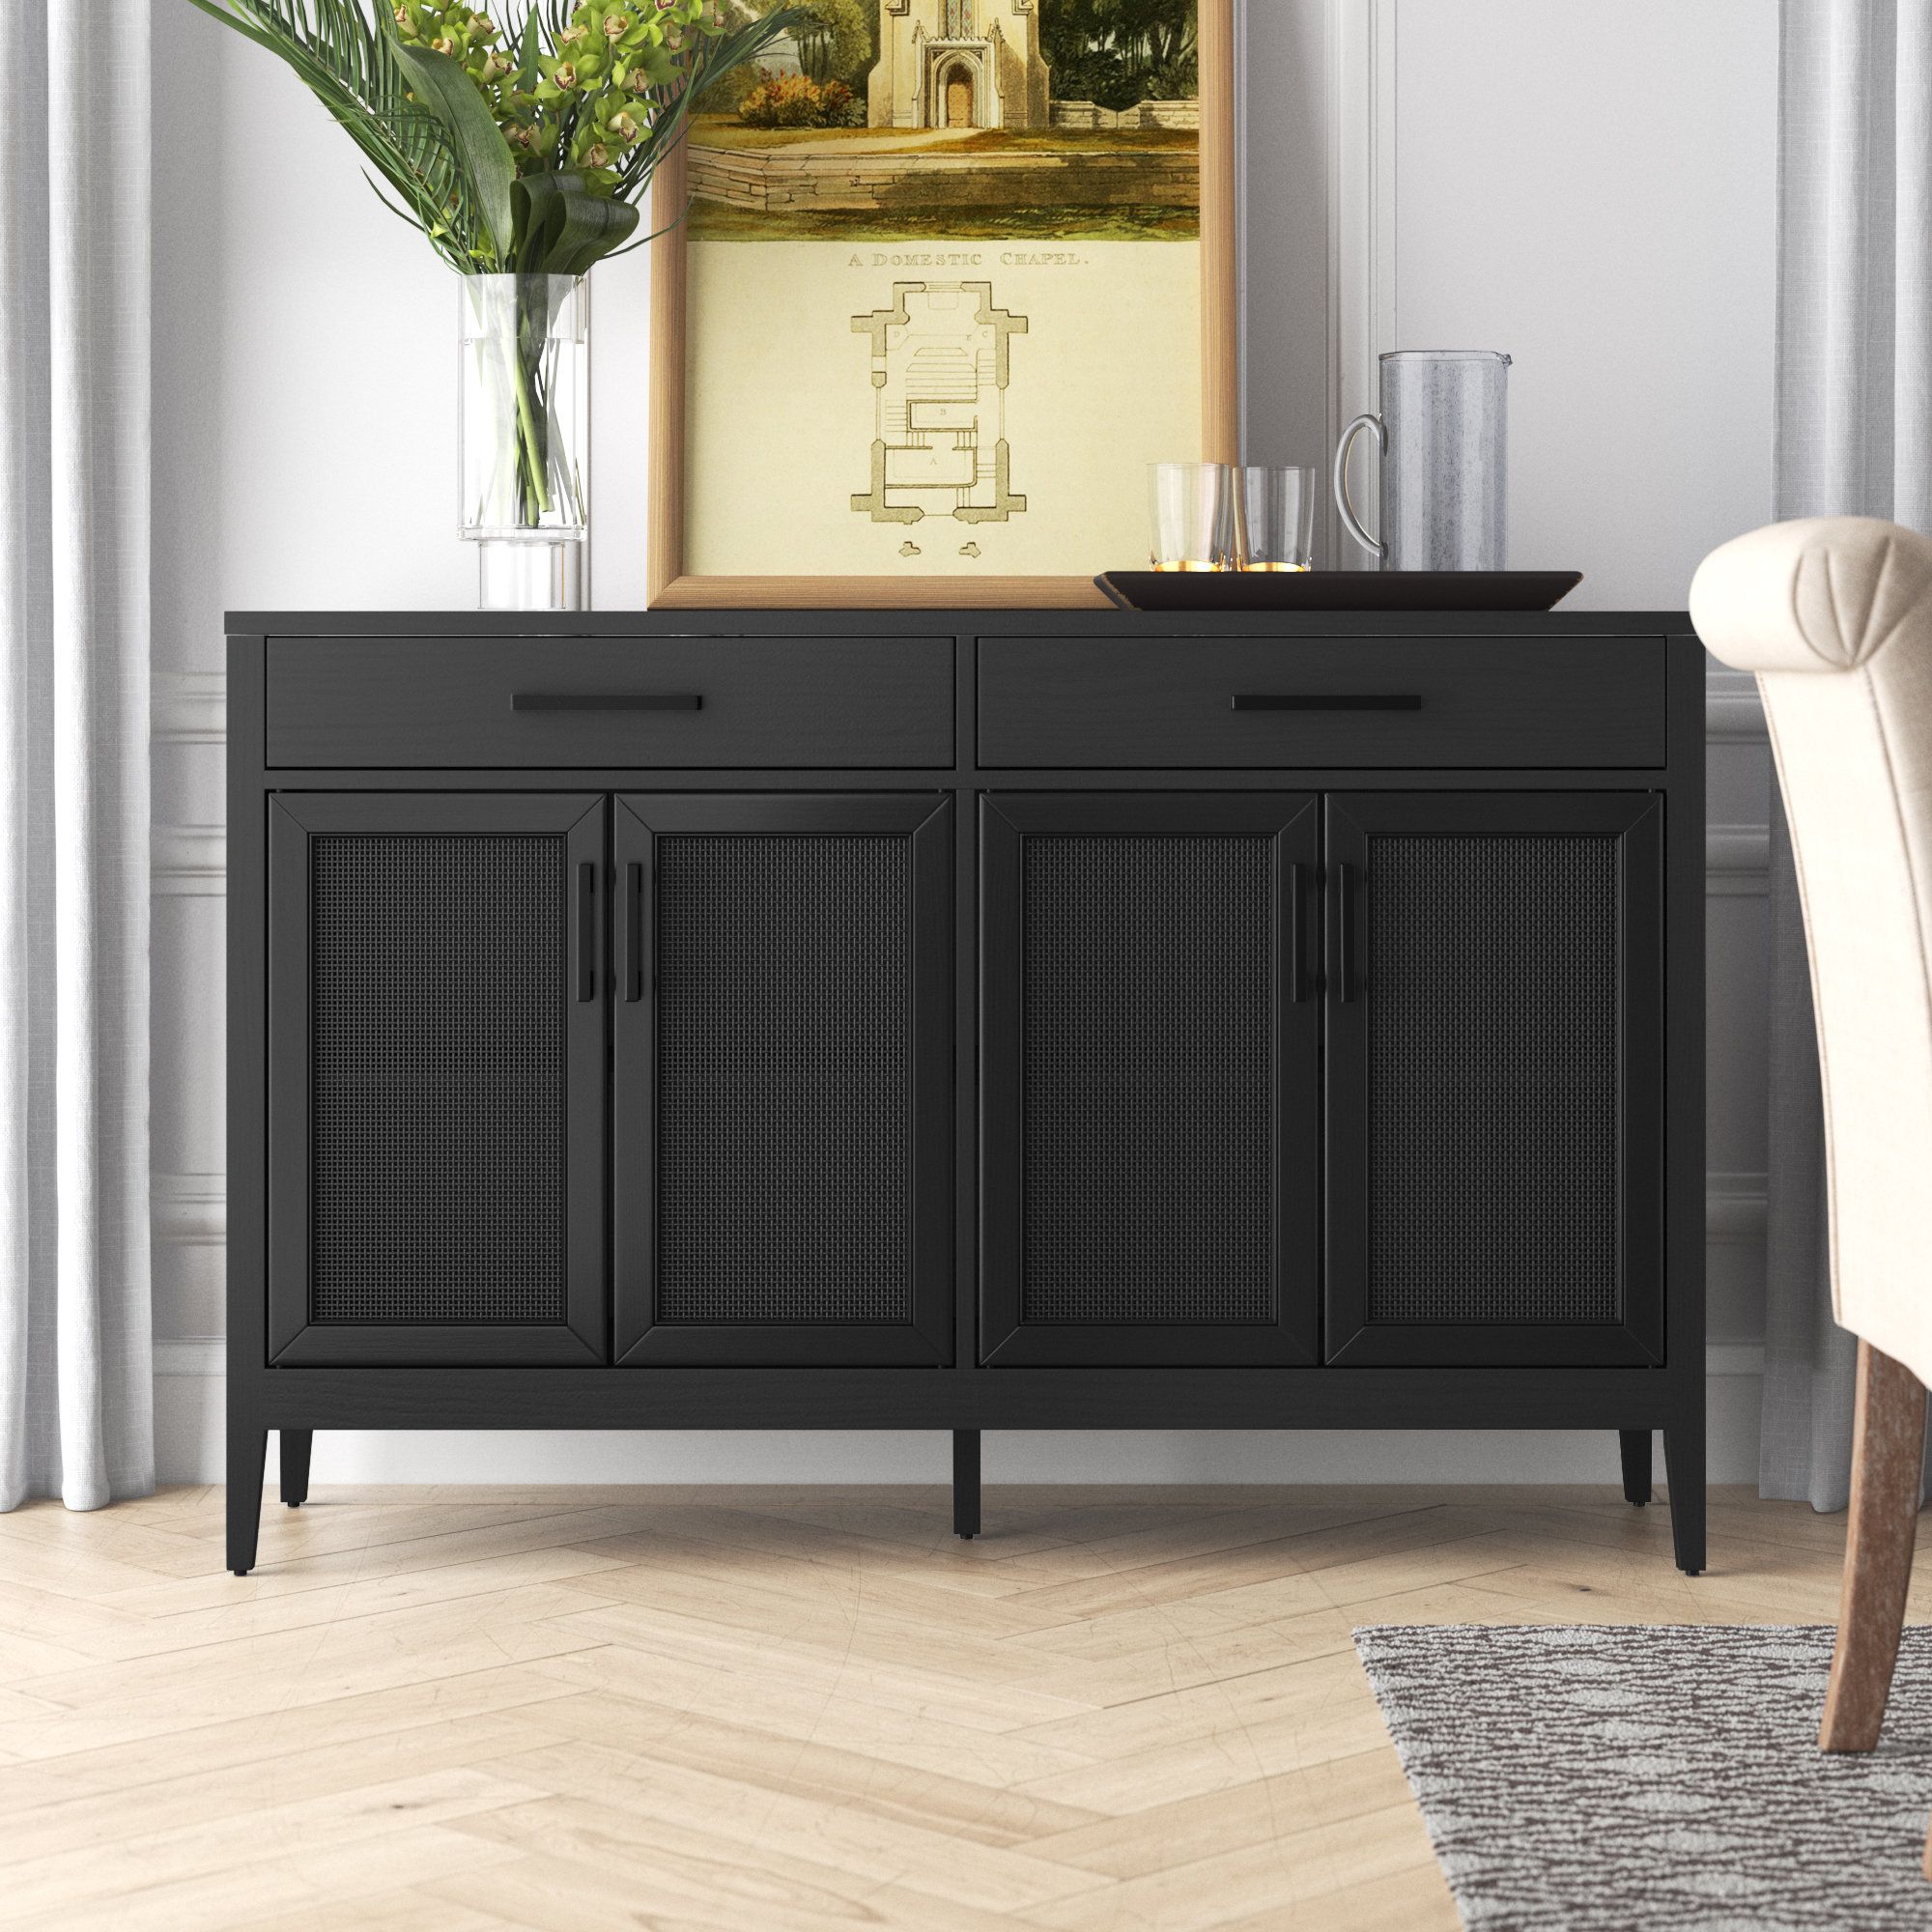 Greyleigh™ Newhaven 56'' Sideboard & Reviews | Wayfair For Sideboards For Entryway (View 10 of 15)